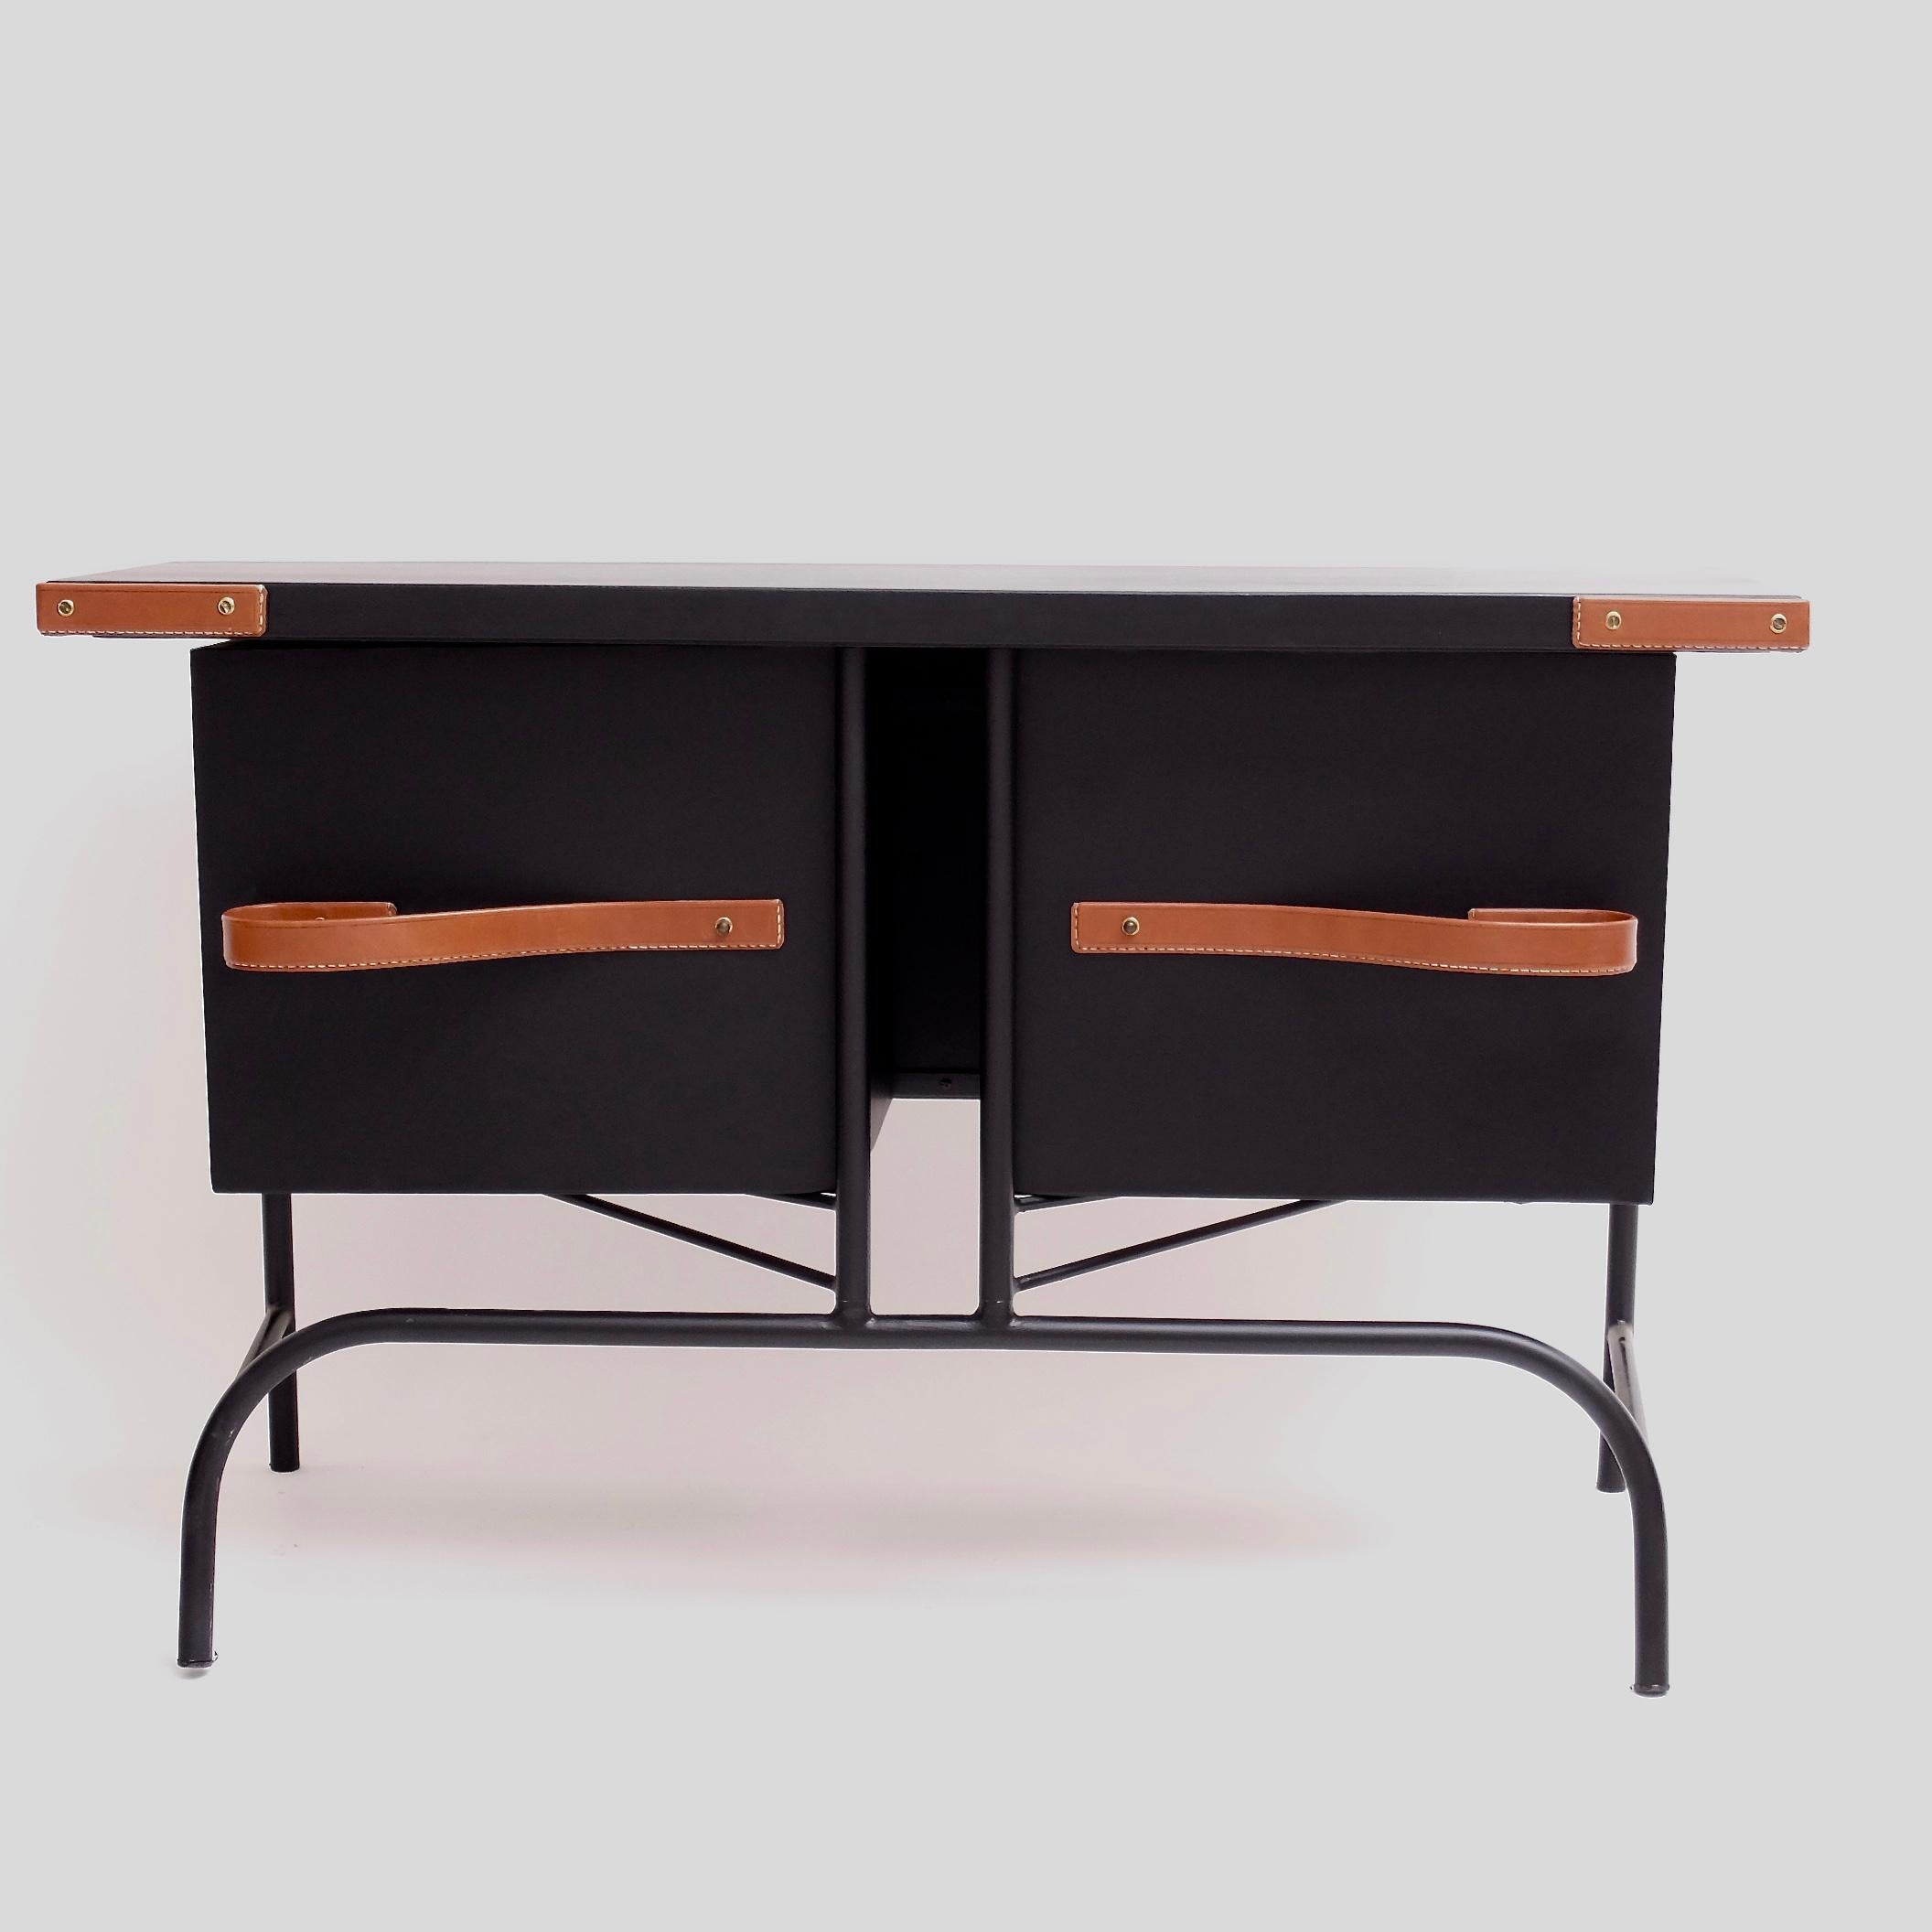 Important console by Jacques Adnet who was the director of the very important 